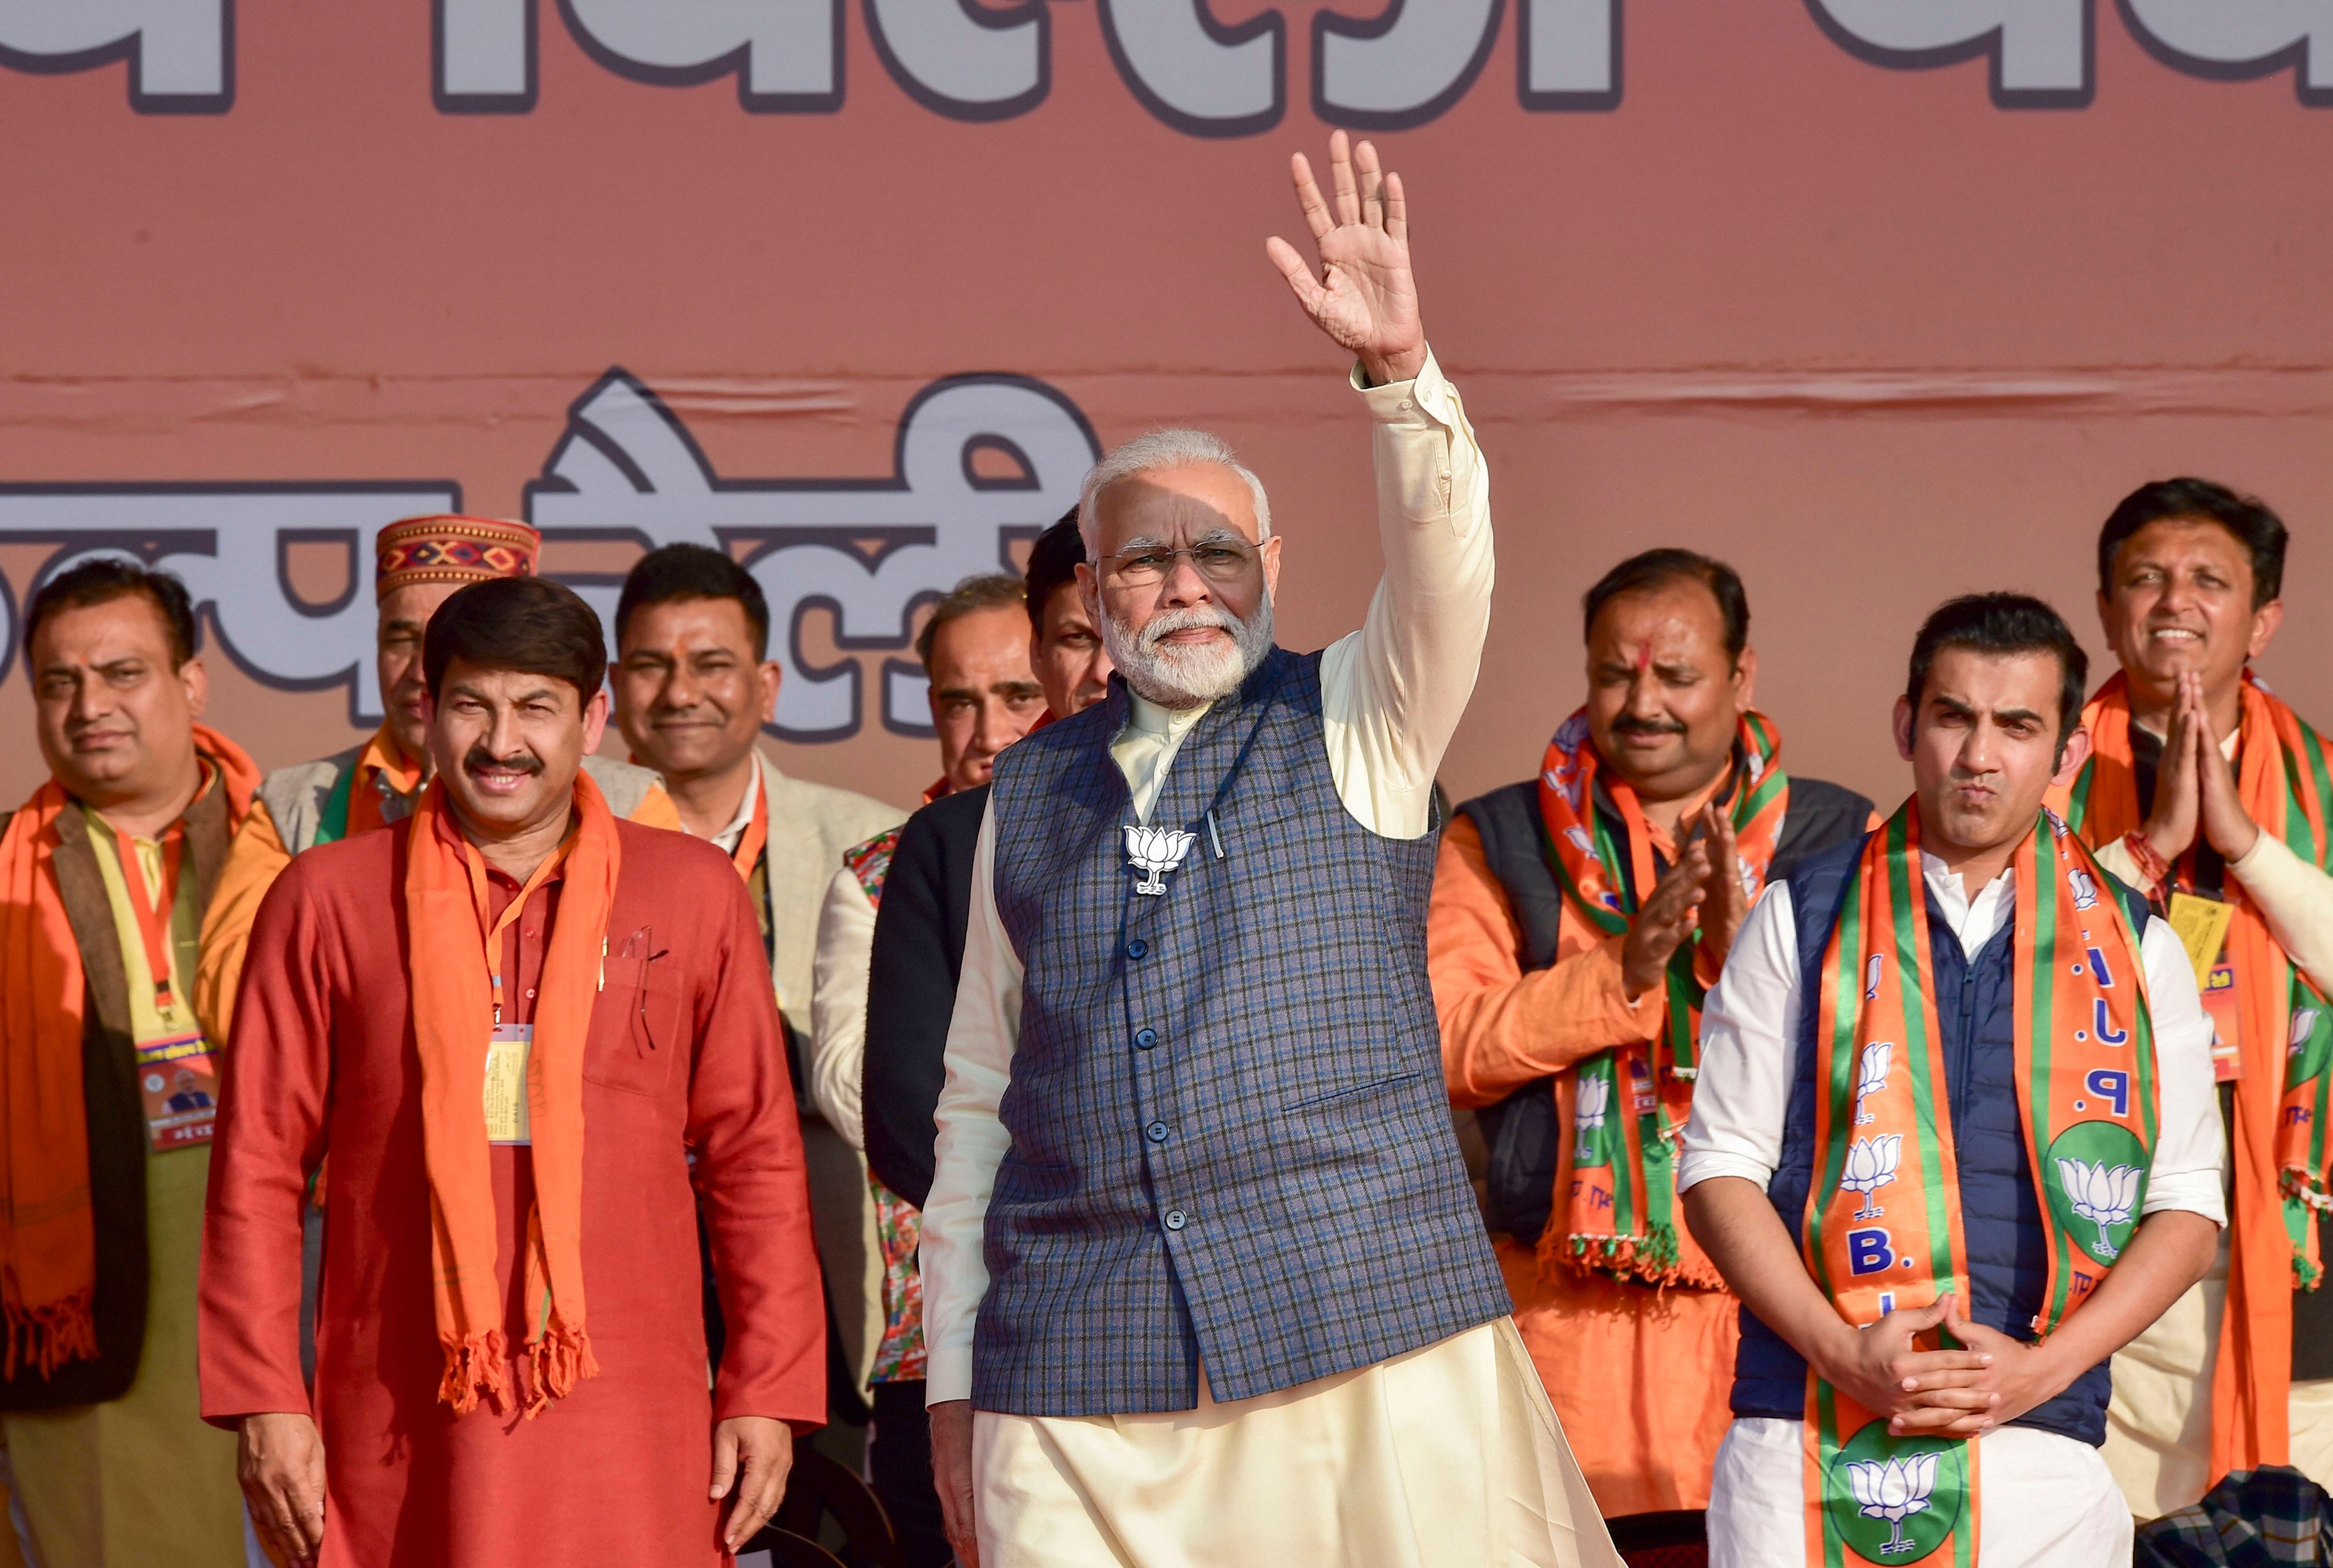 Prime Minister Narendra Modi during Vijay Sankalp Rally in support of East Delhi candidates ahead of the upcoming Delhi Assembly polls, at Karkardooma in New Delhi, Monday, Feb. 3, 2020. BJP MP Gautam Gambhir and party state president Manoj Tiwari are also seen. (PTI Photo)